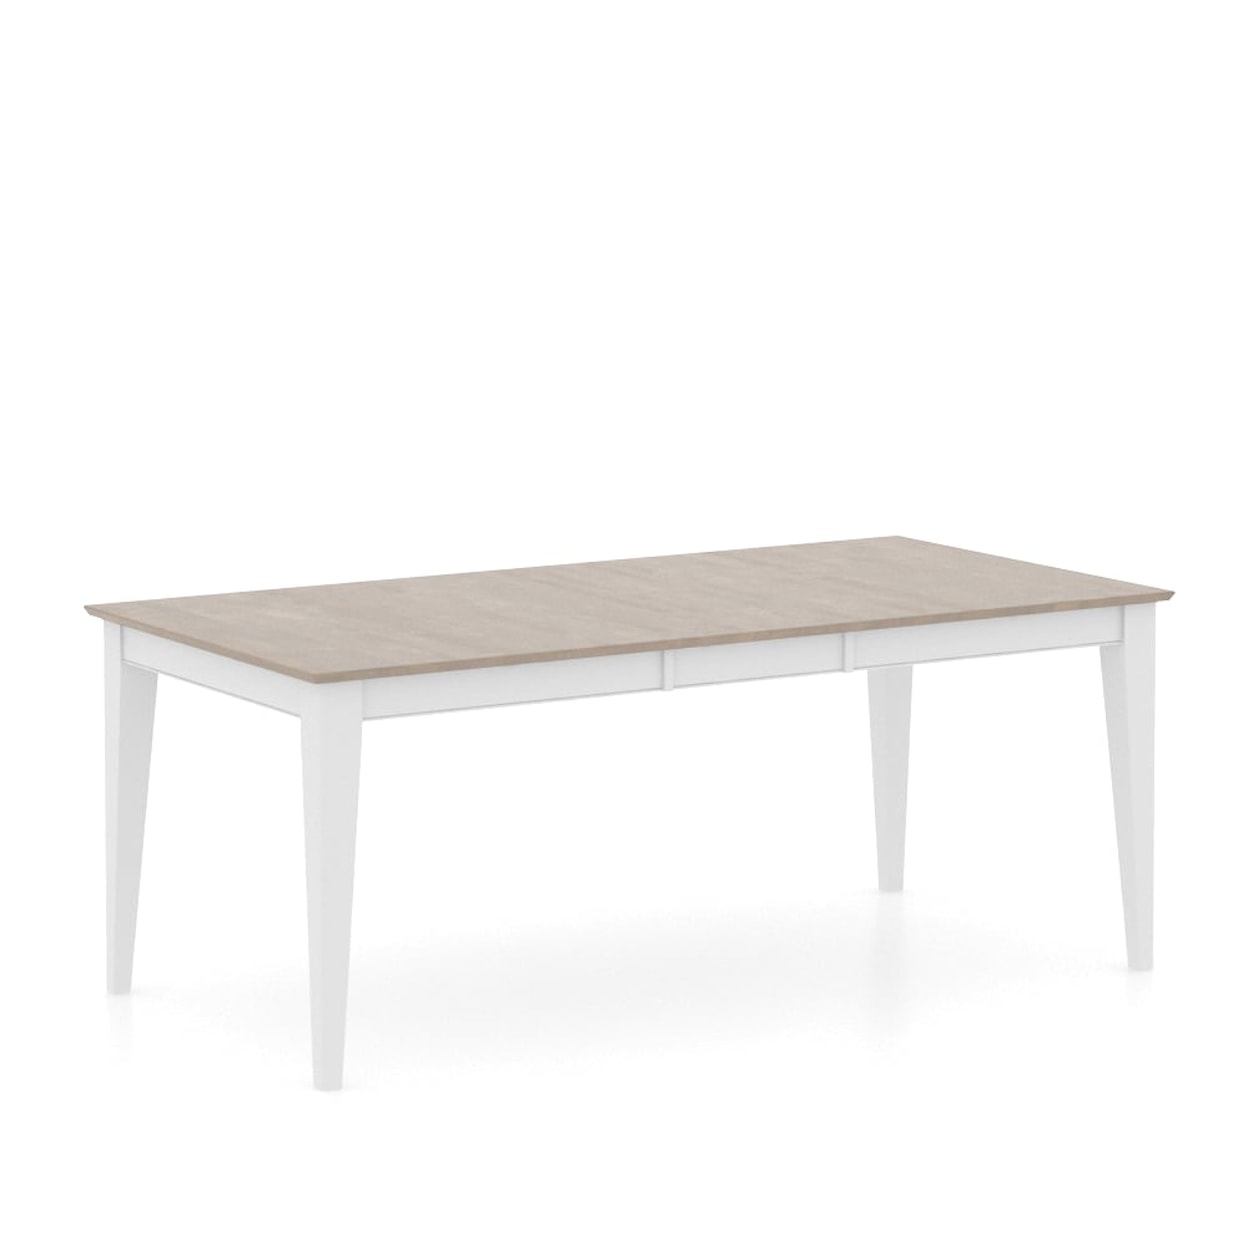 Canadel Gourmet Customizable Dining Table w/ Leaf